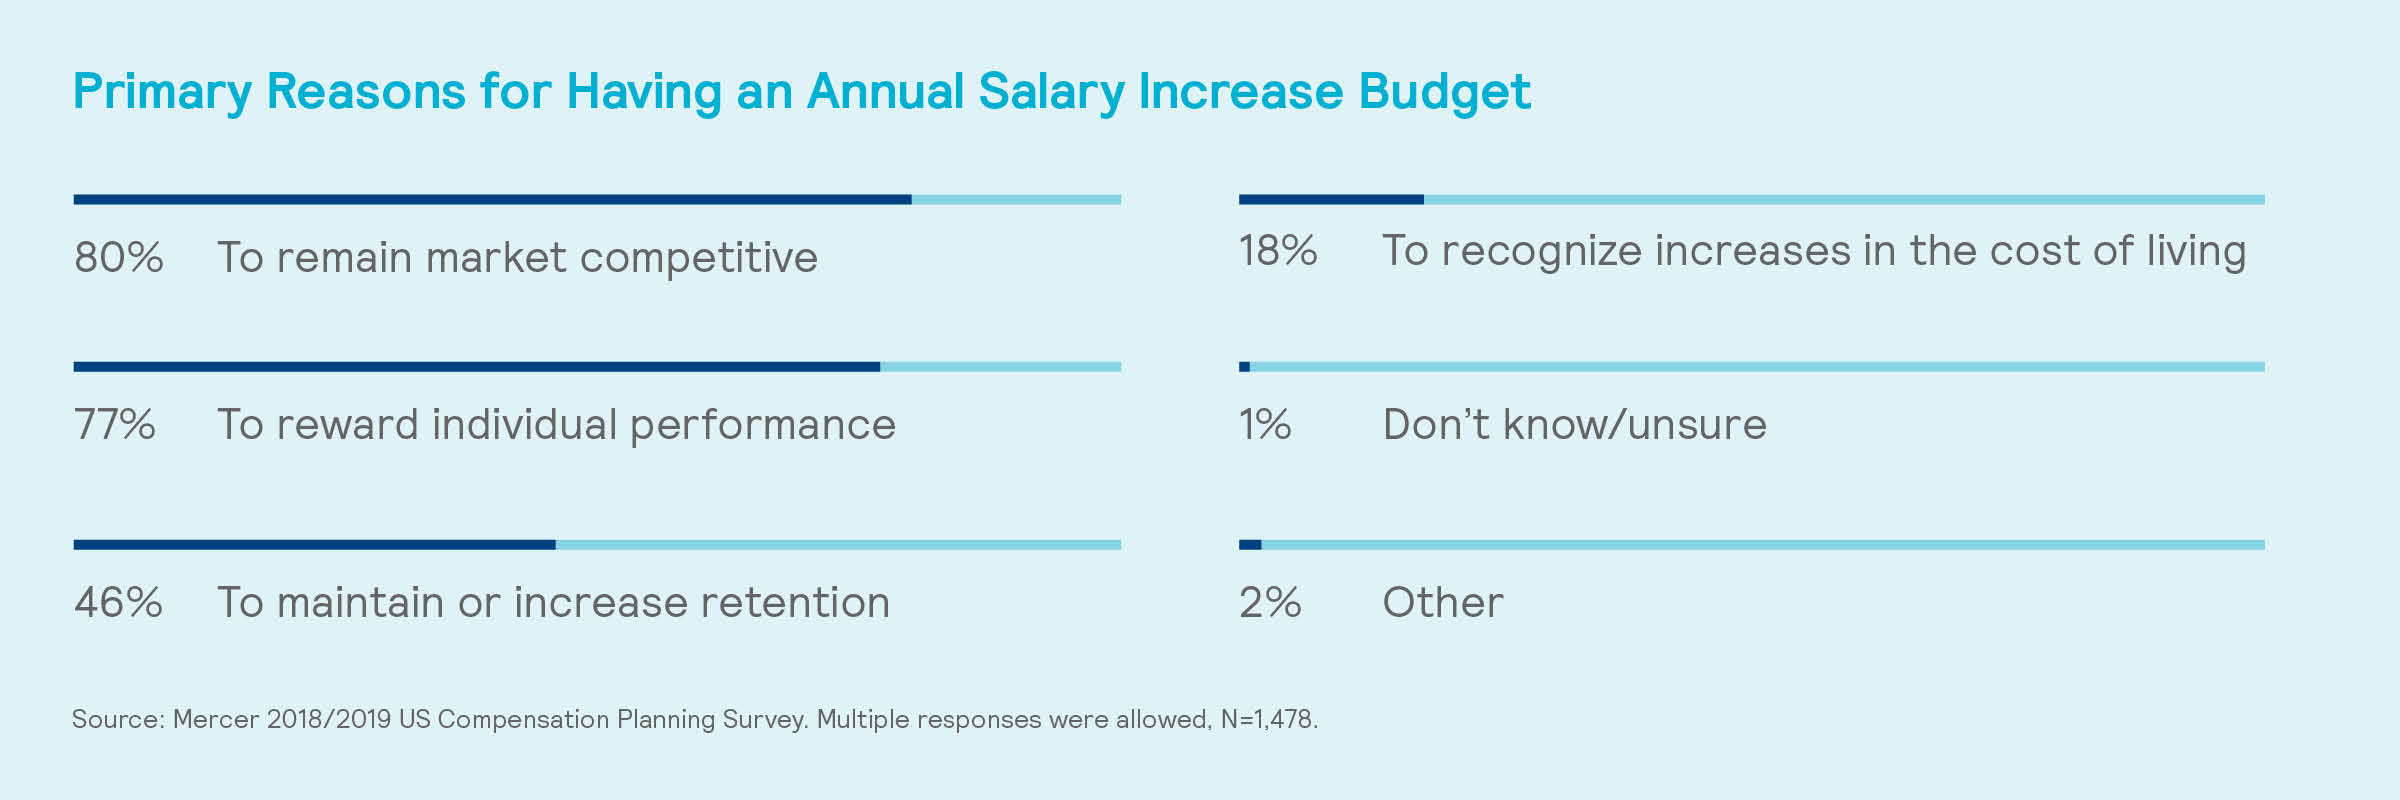 Primary Reasons for Having an Annual Salary Increase Budget